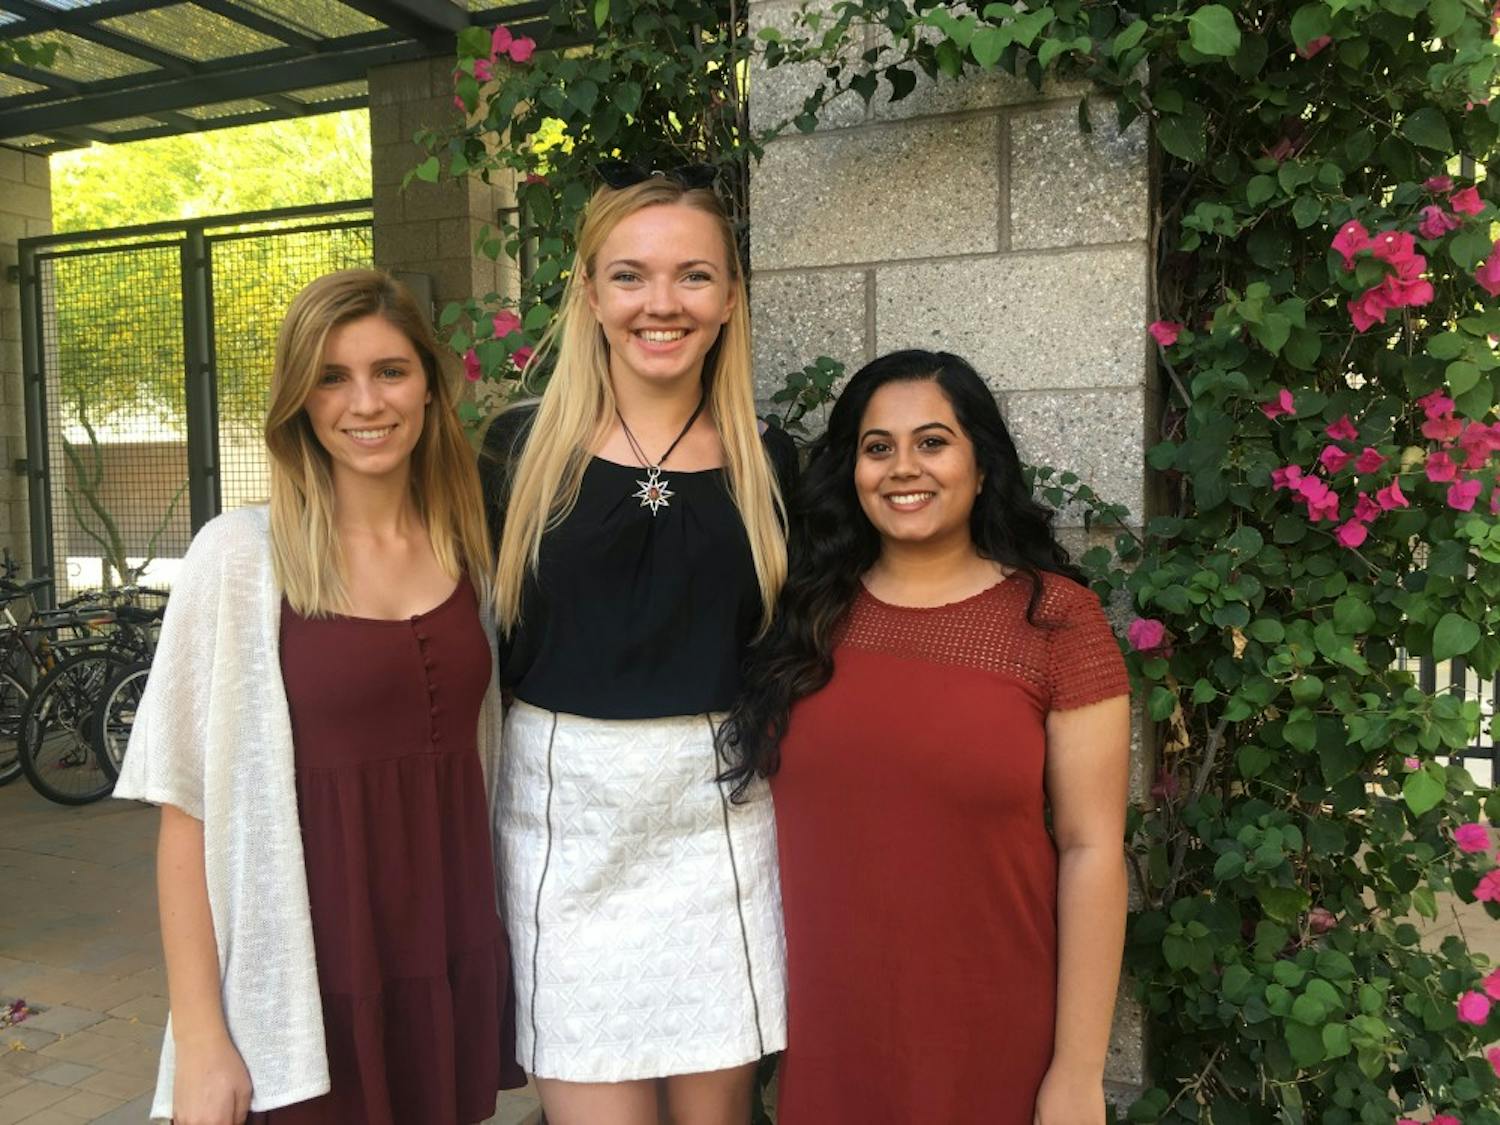 From left, Emma Giles, Haley Gerber and Pashmi Mehta, a few of the students involved in Period Project, pose for a photo&nbsp;on ASU's Tempe Campus on Monday, April 17, 2017.